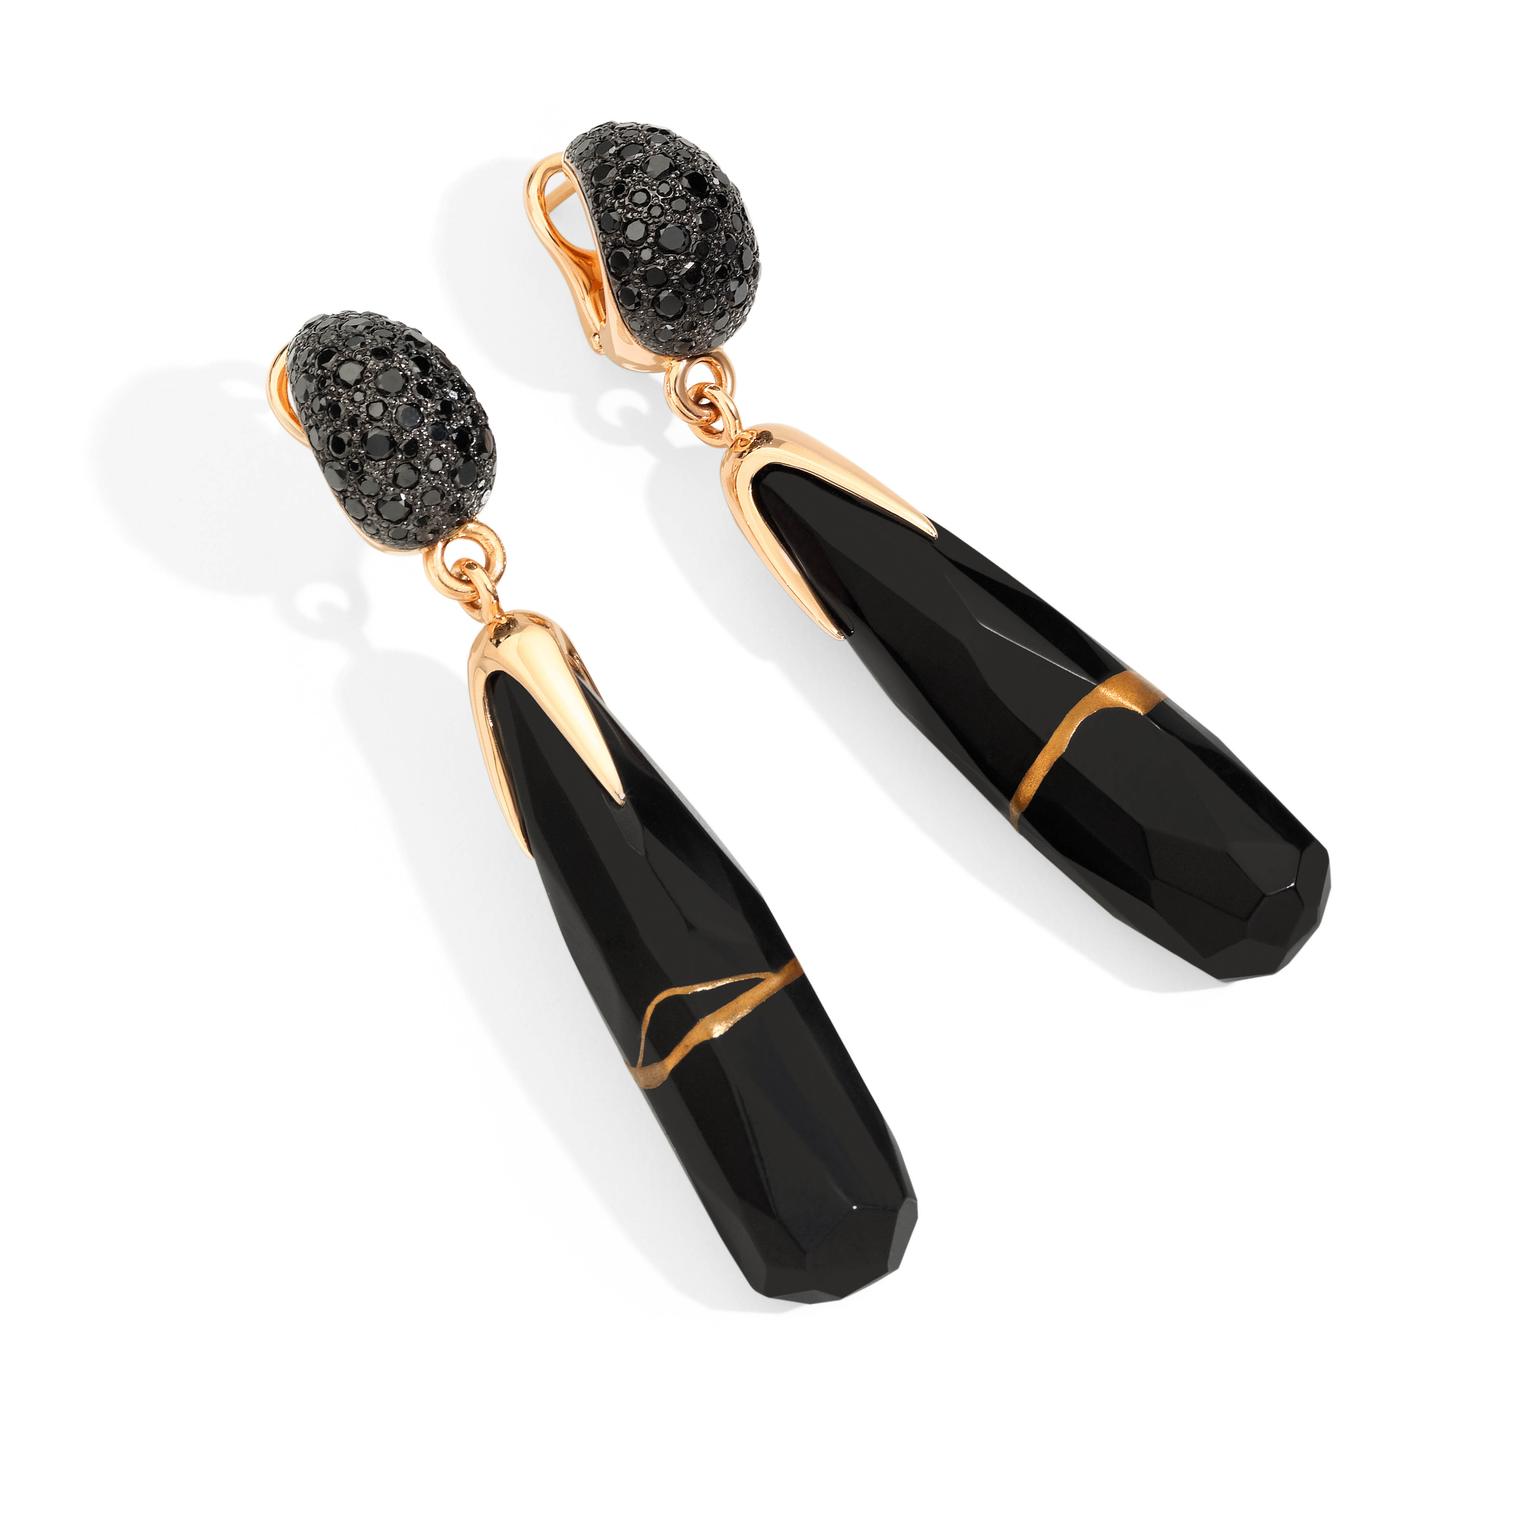 Pomellato Kintsugi Collection_earrings in rose gold with jet and balck diamonds